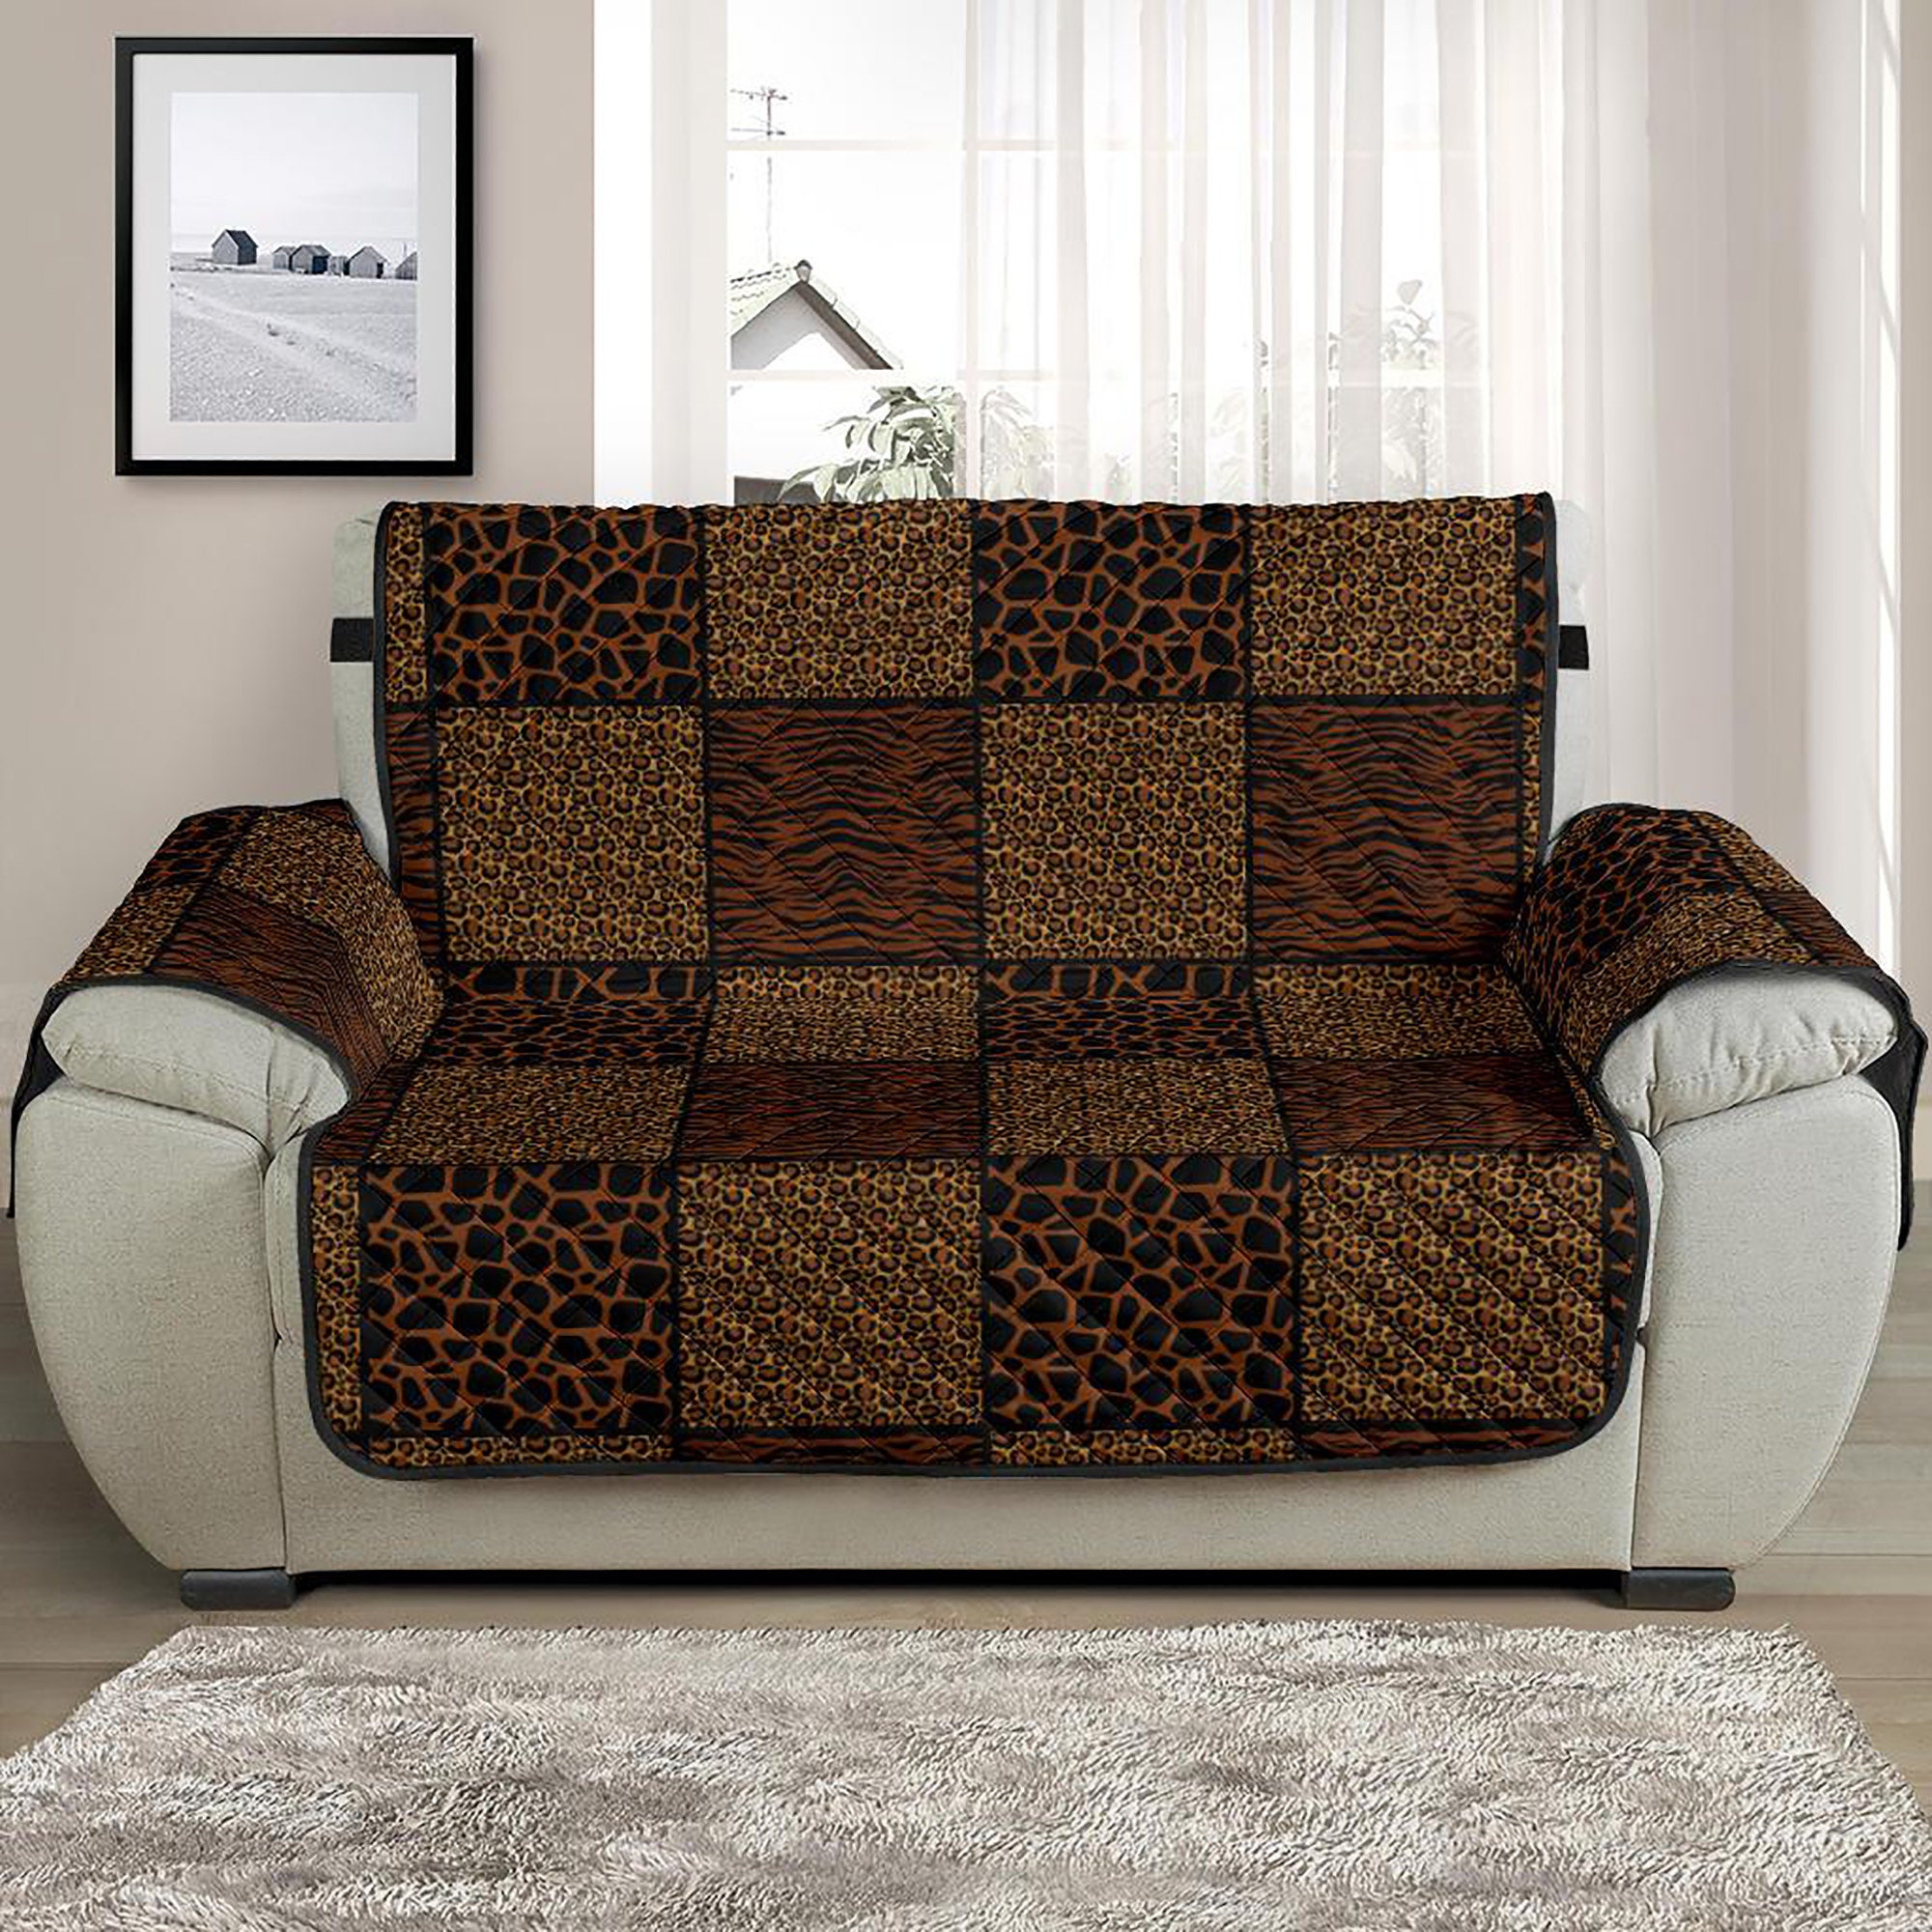 Cotton Animal Tiger Printed European American Style Sofa Bed Throw Blanket Cover 